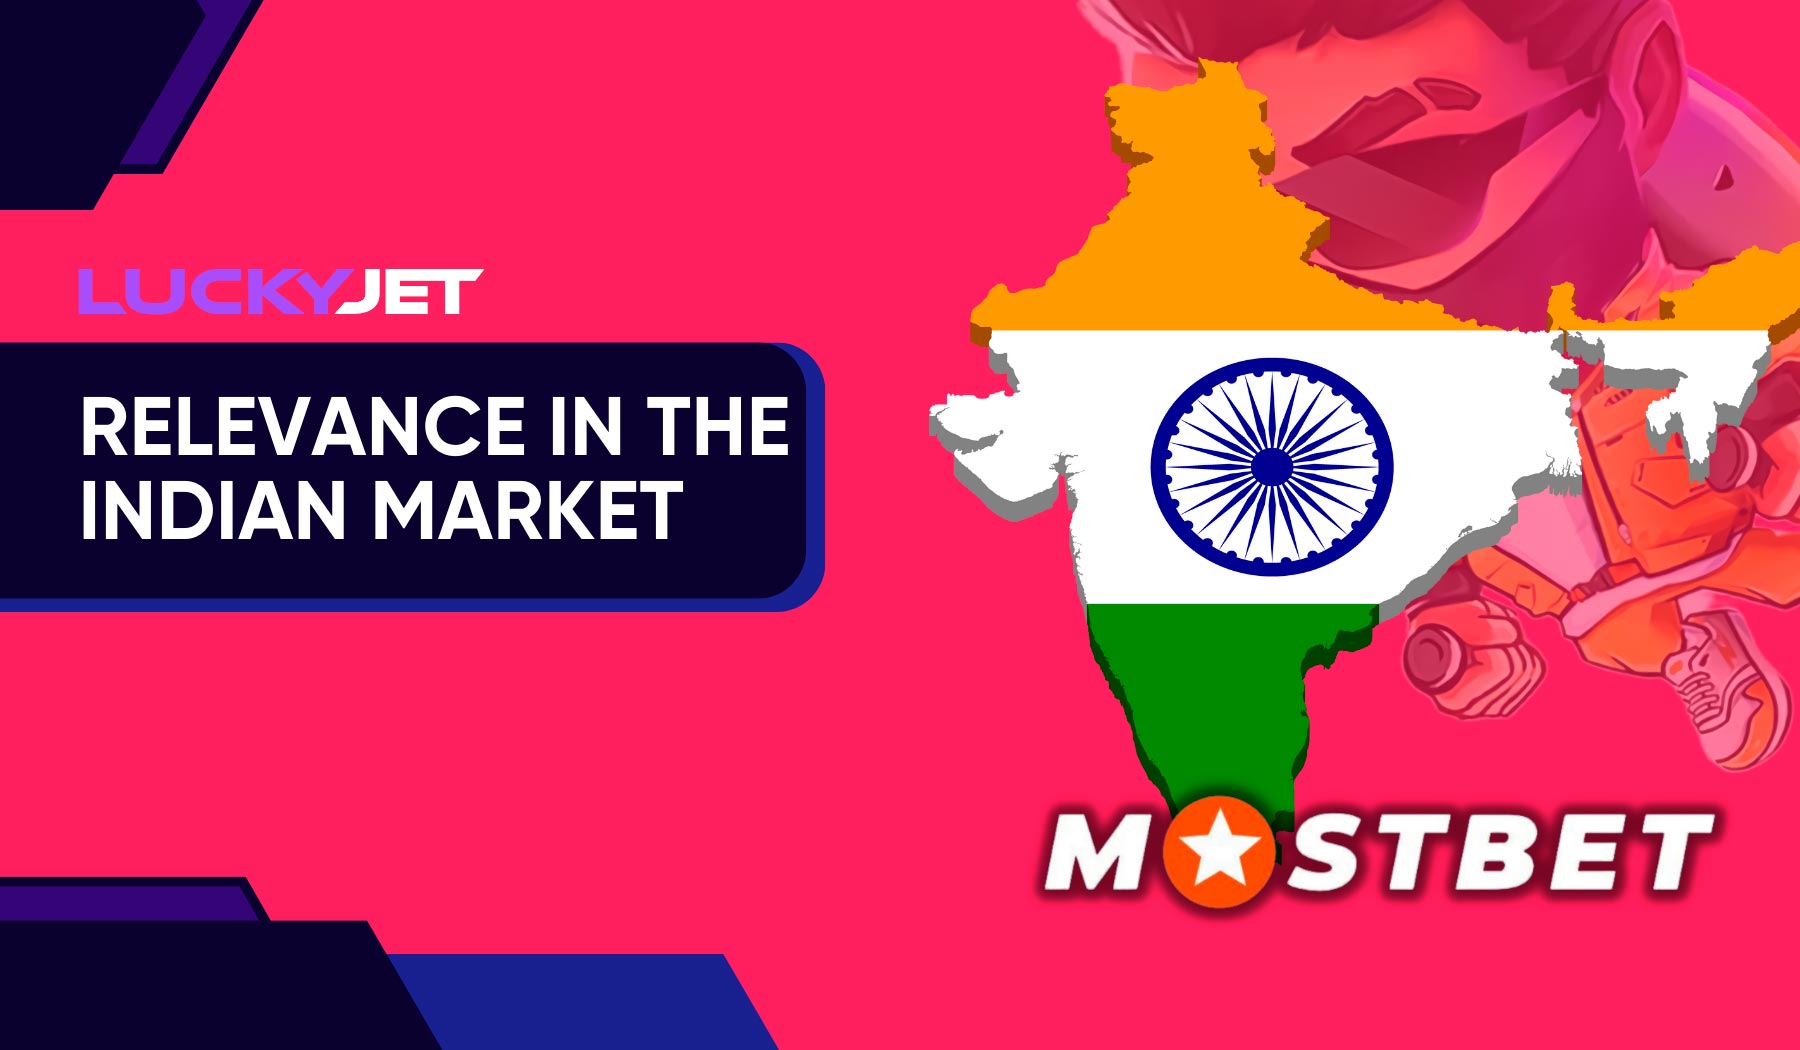 Mostbet Jet Parimatch in the Indian market